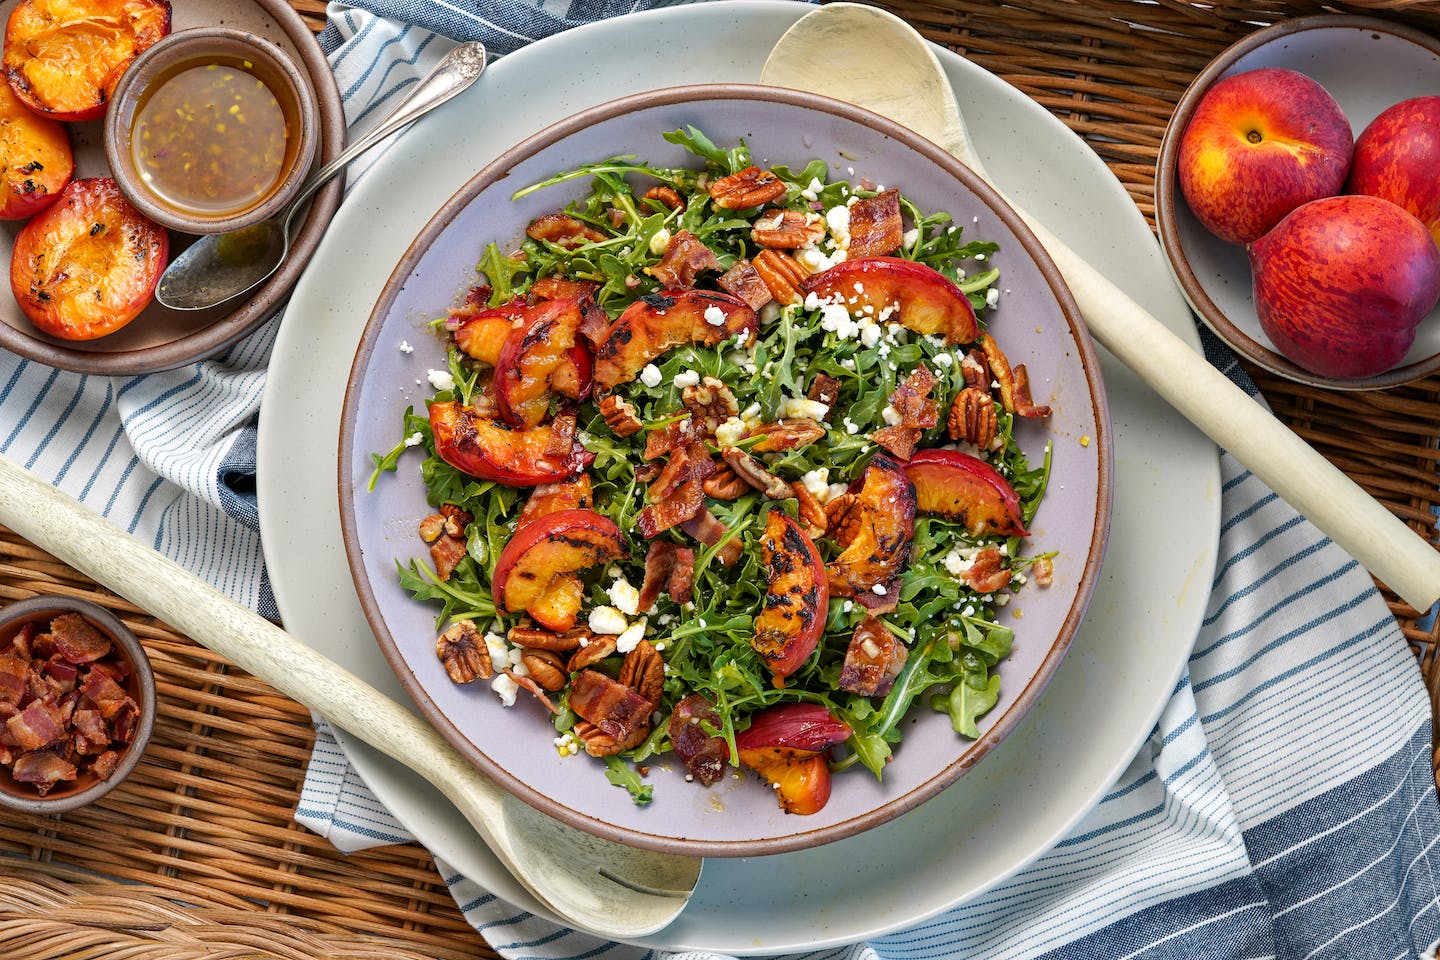 Grilled Peach and Bacon Salad with Maple Vinaigrette